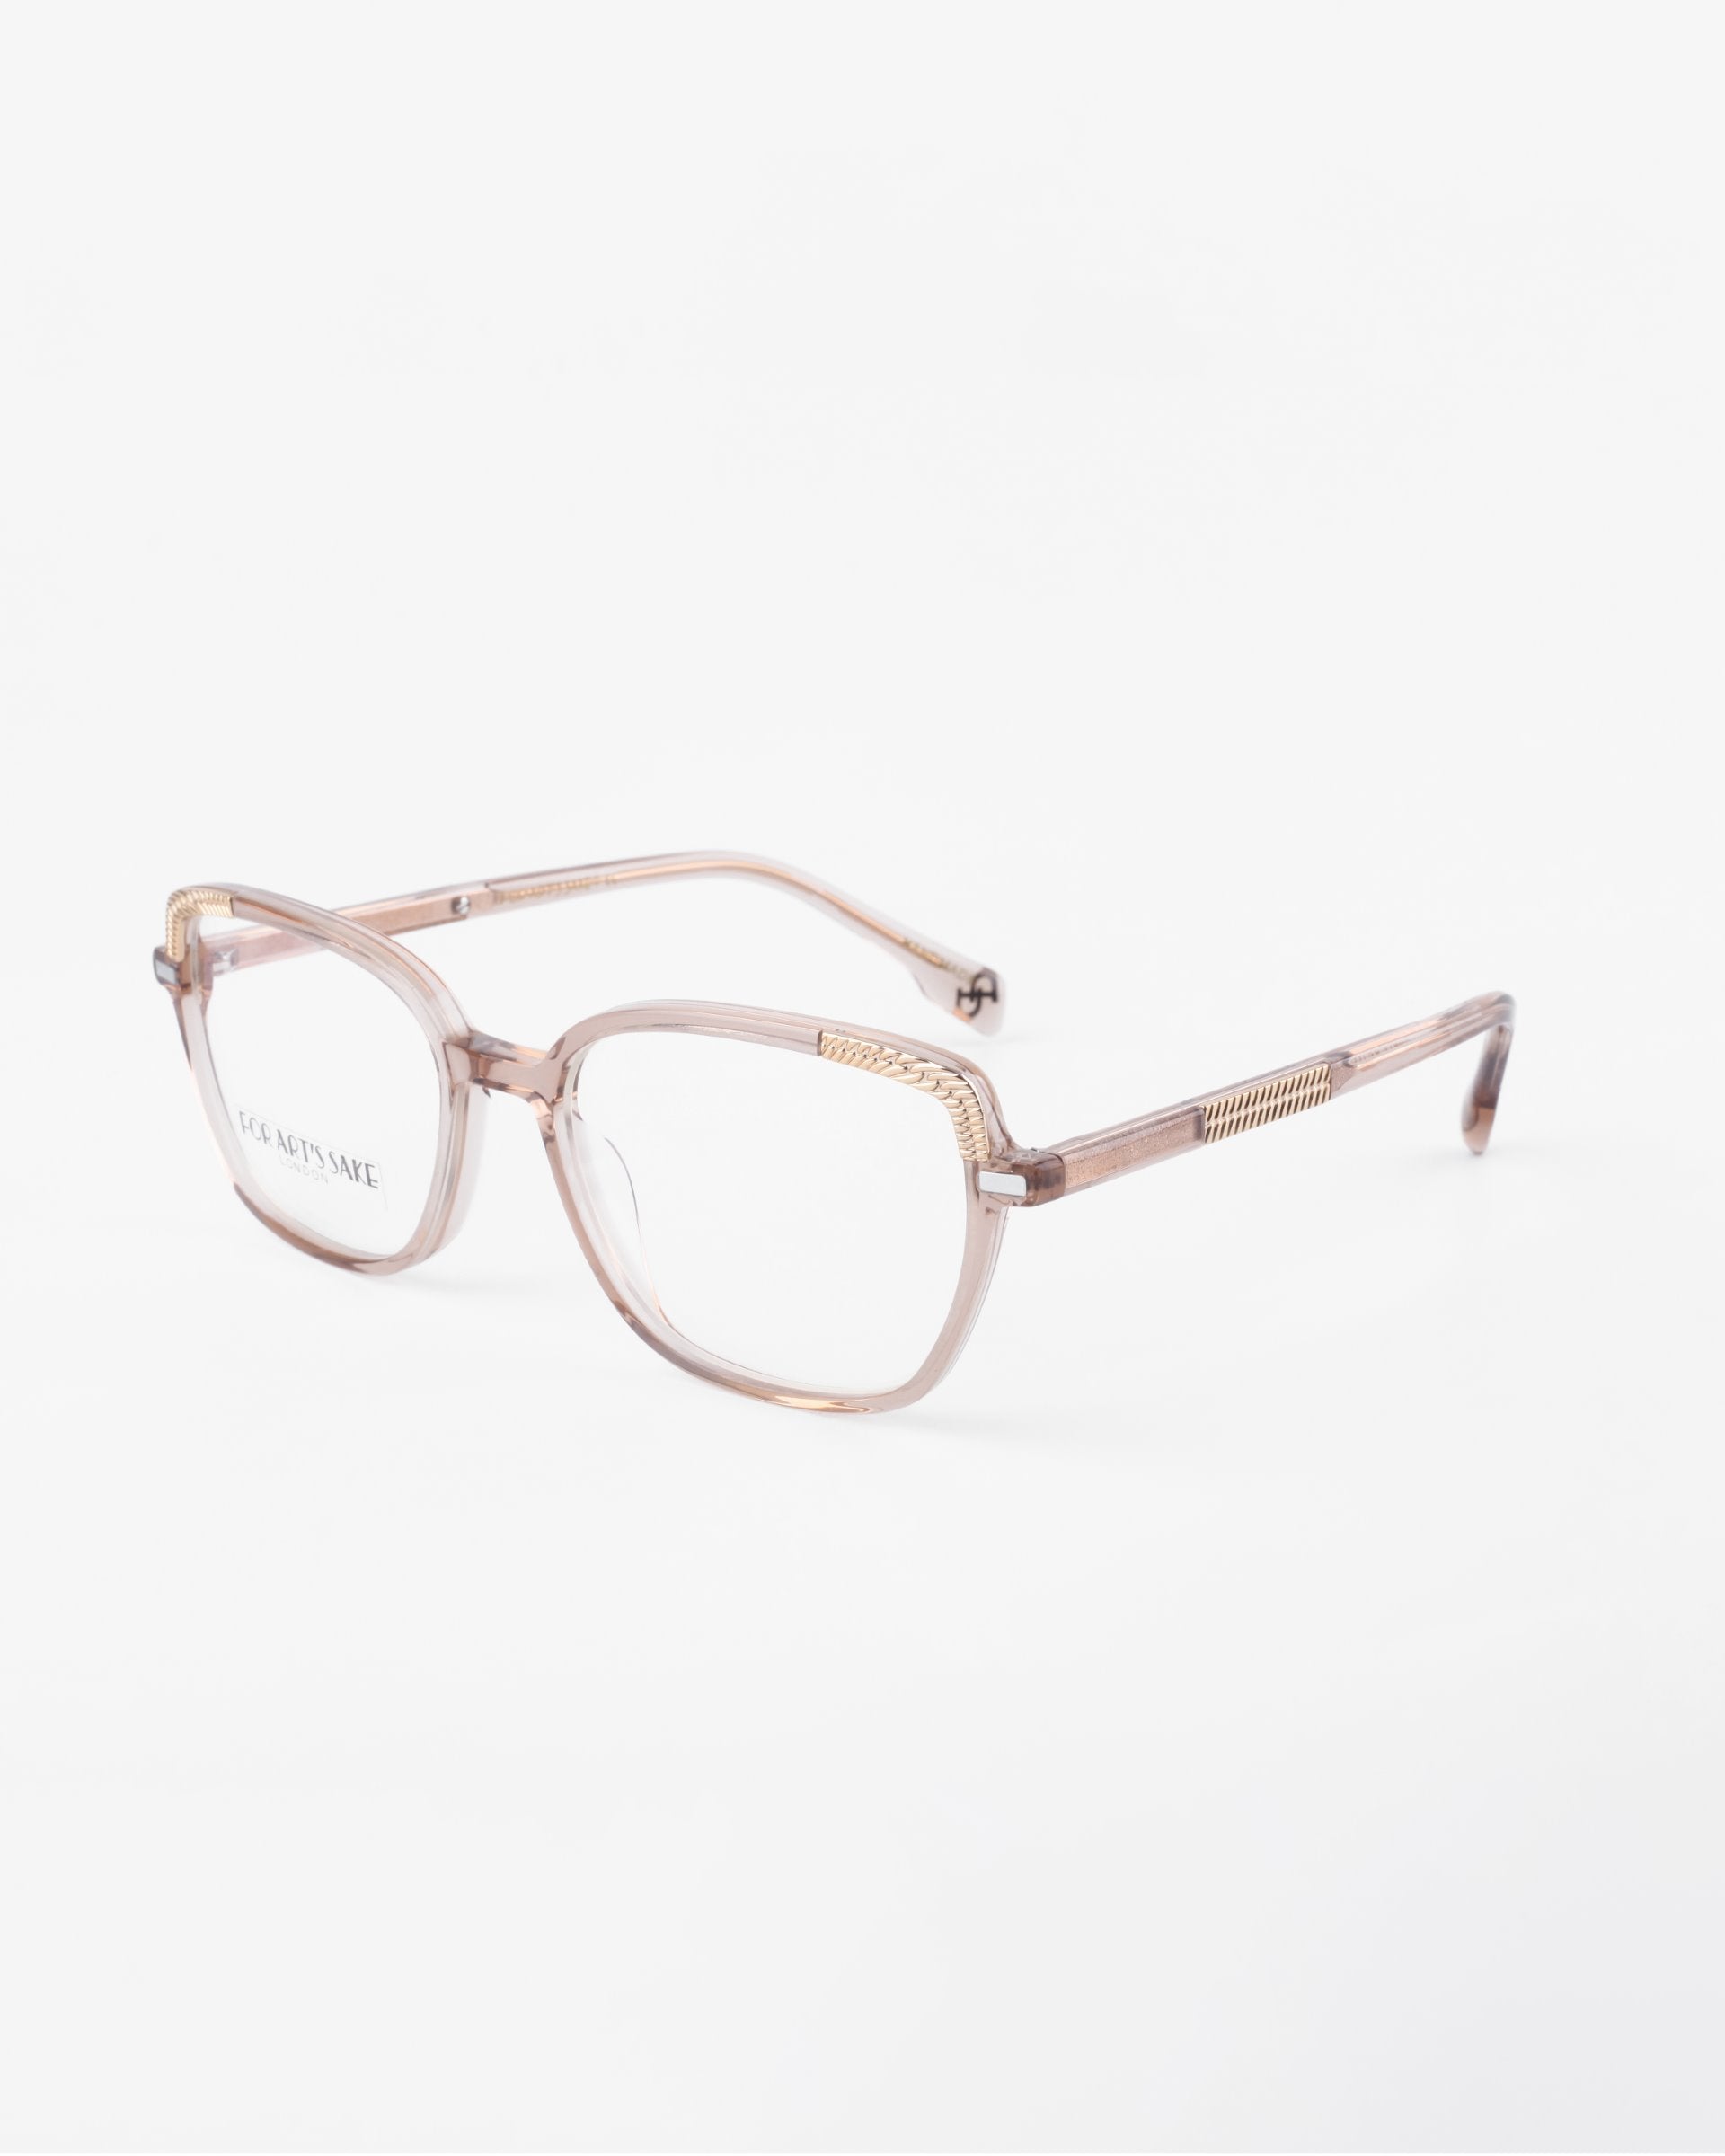 A pair of eyeglasses with a transparent pinkish-brown frame. The lenses feature a blue light filter, and the arms have a subtle golden detail near the hinges. The Mimosa by For Art&#39;s Sake®, with their gold-plated frames, are set against a plain white background.